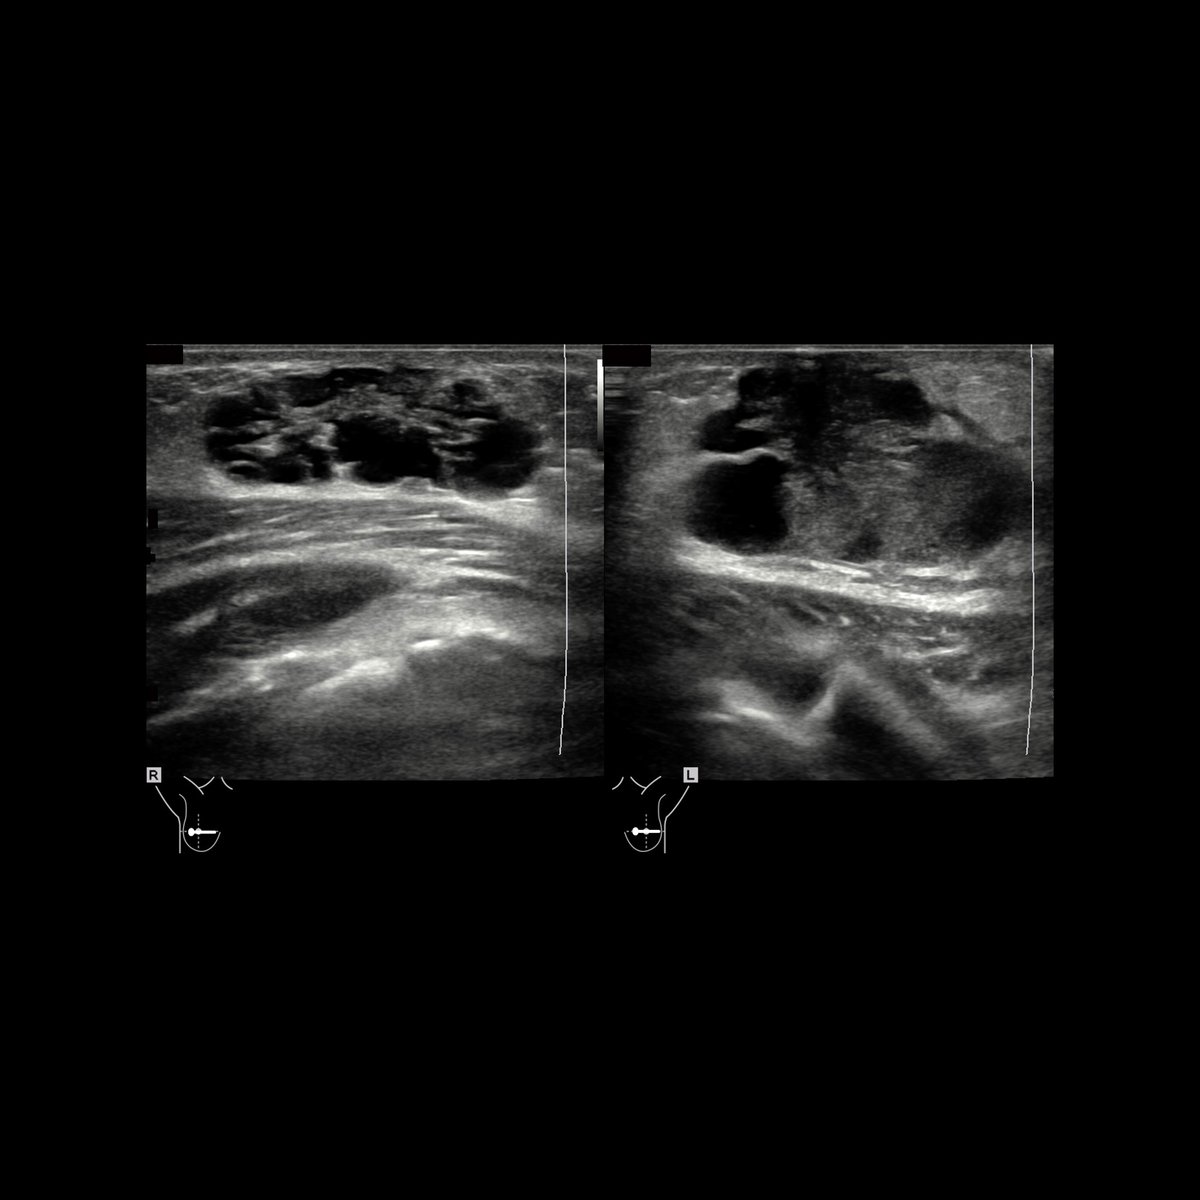 Female infant with left breast swelling

Transverse US of retroaerolar regions of right breast(left)+left breast(right) show mild bilateral skin thickening with bilateral diffusely hyperechoic breast tissue containing multiple anechoic lesions.

#FOAMed #MedEd #FOAMRad #PedsRad